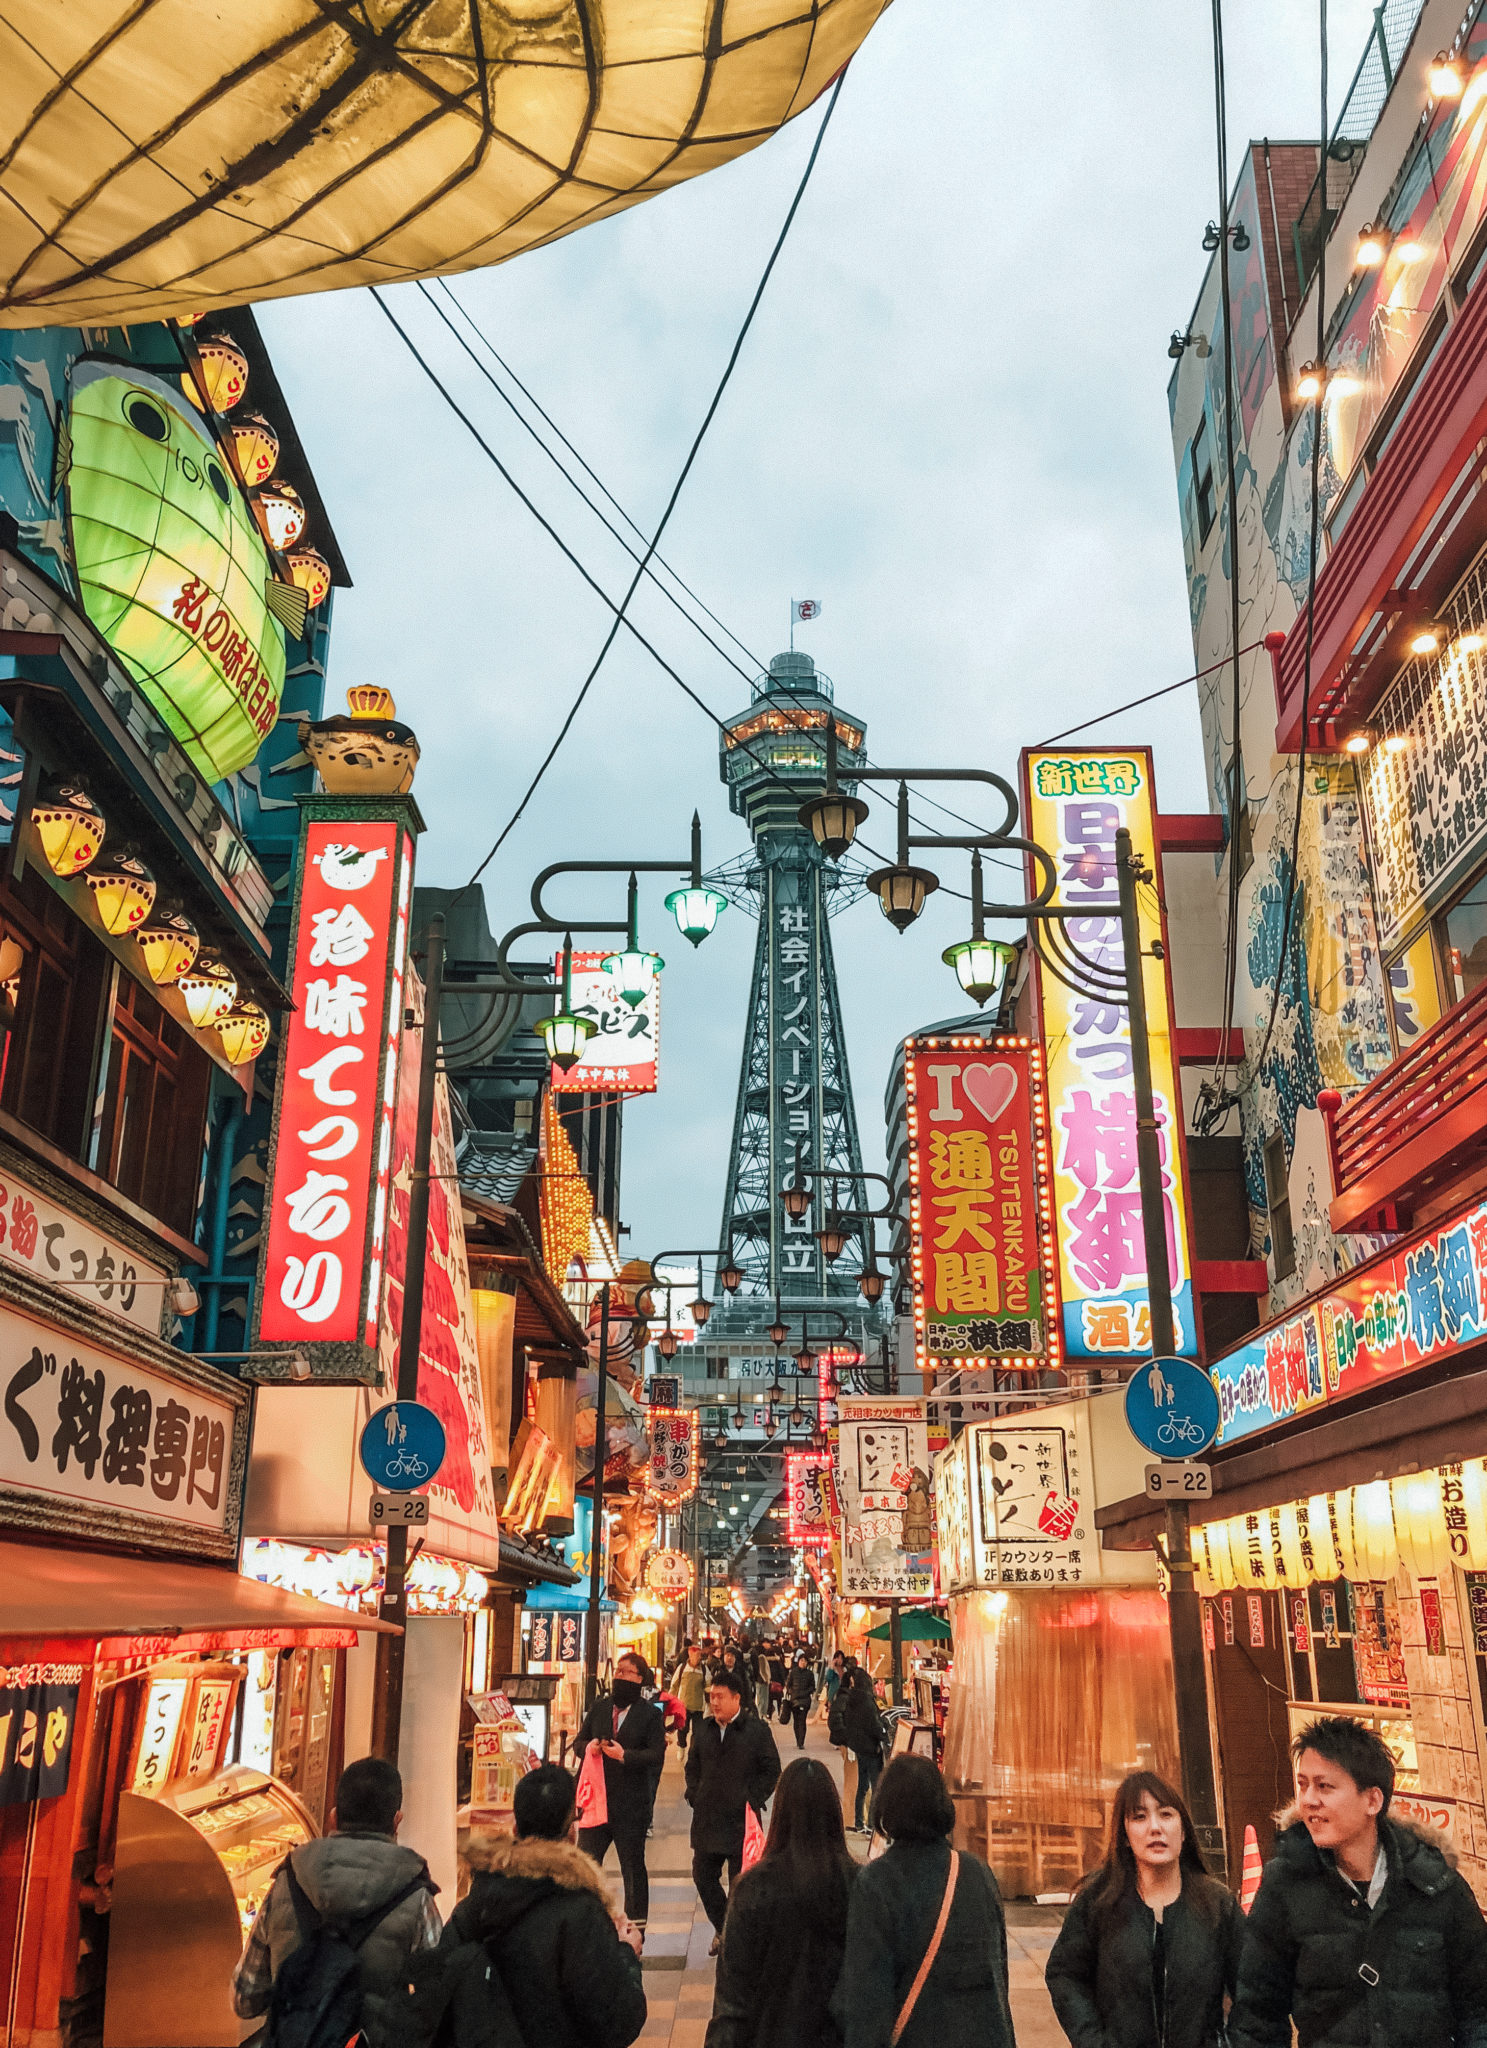 Osaka Travel Guide: How to Spend 24 Hours in Osaka